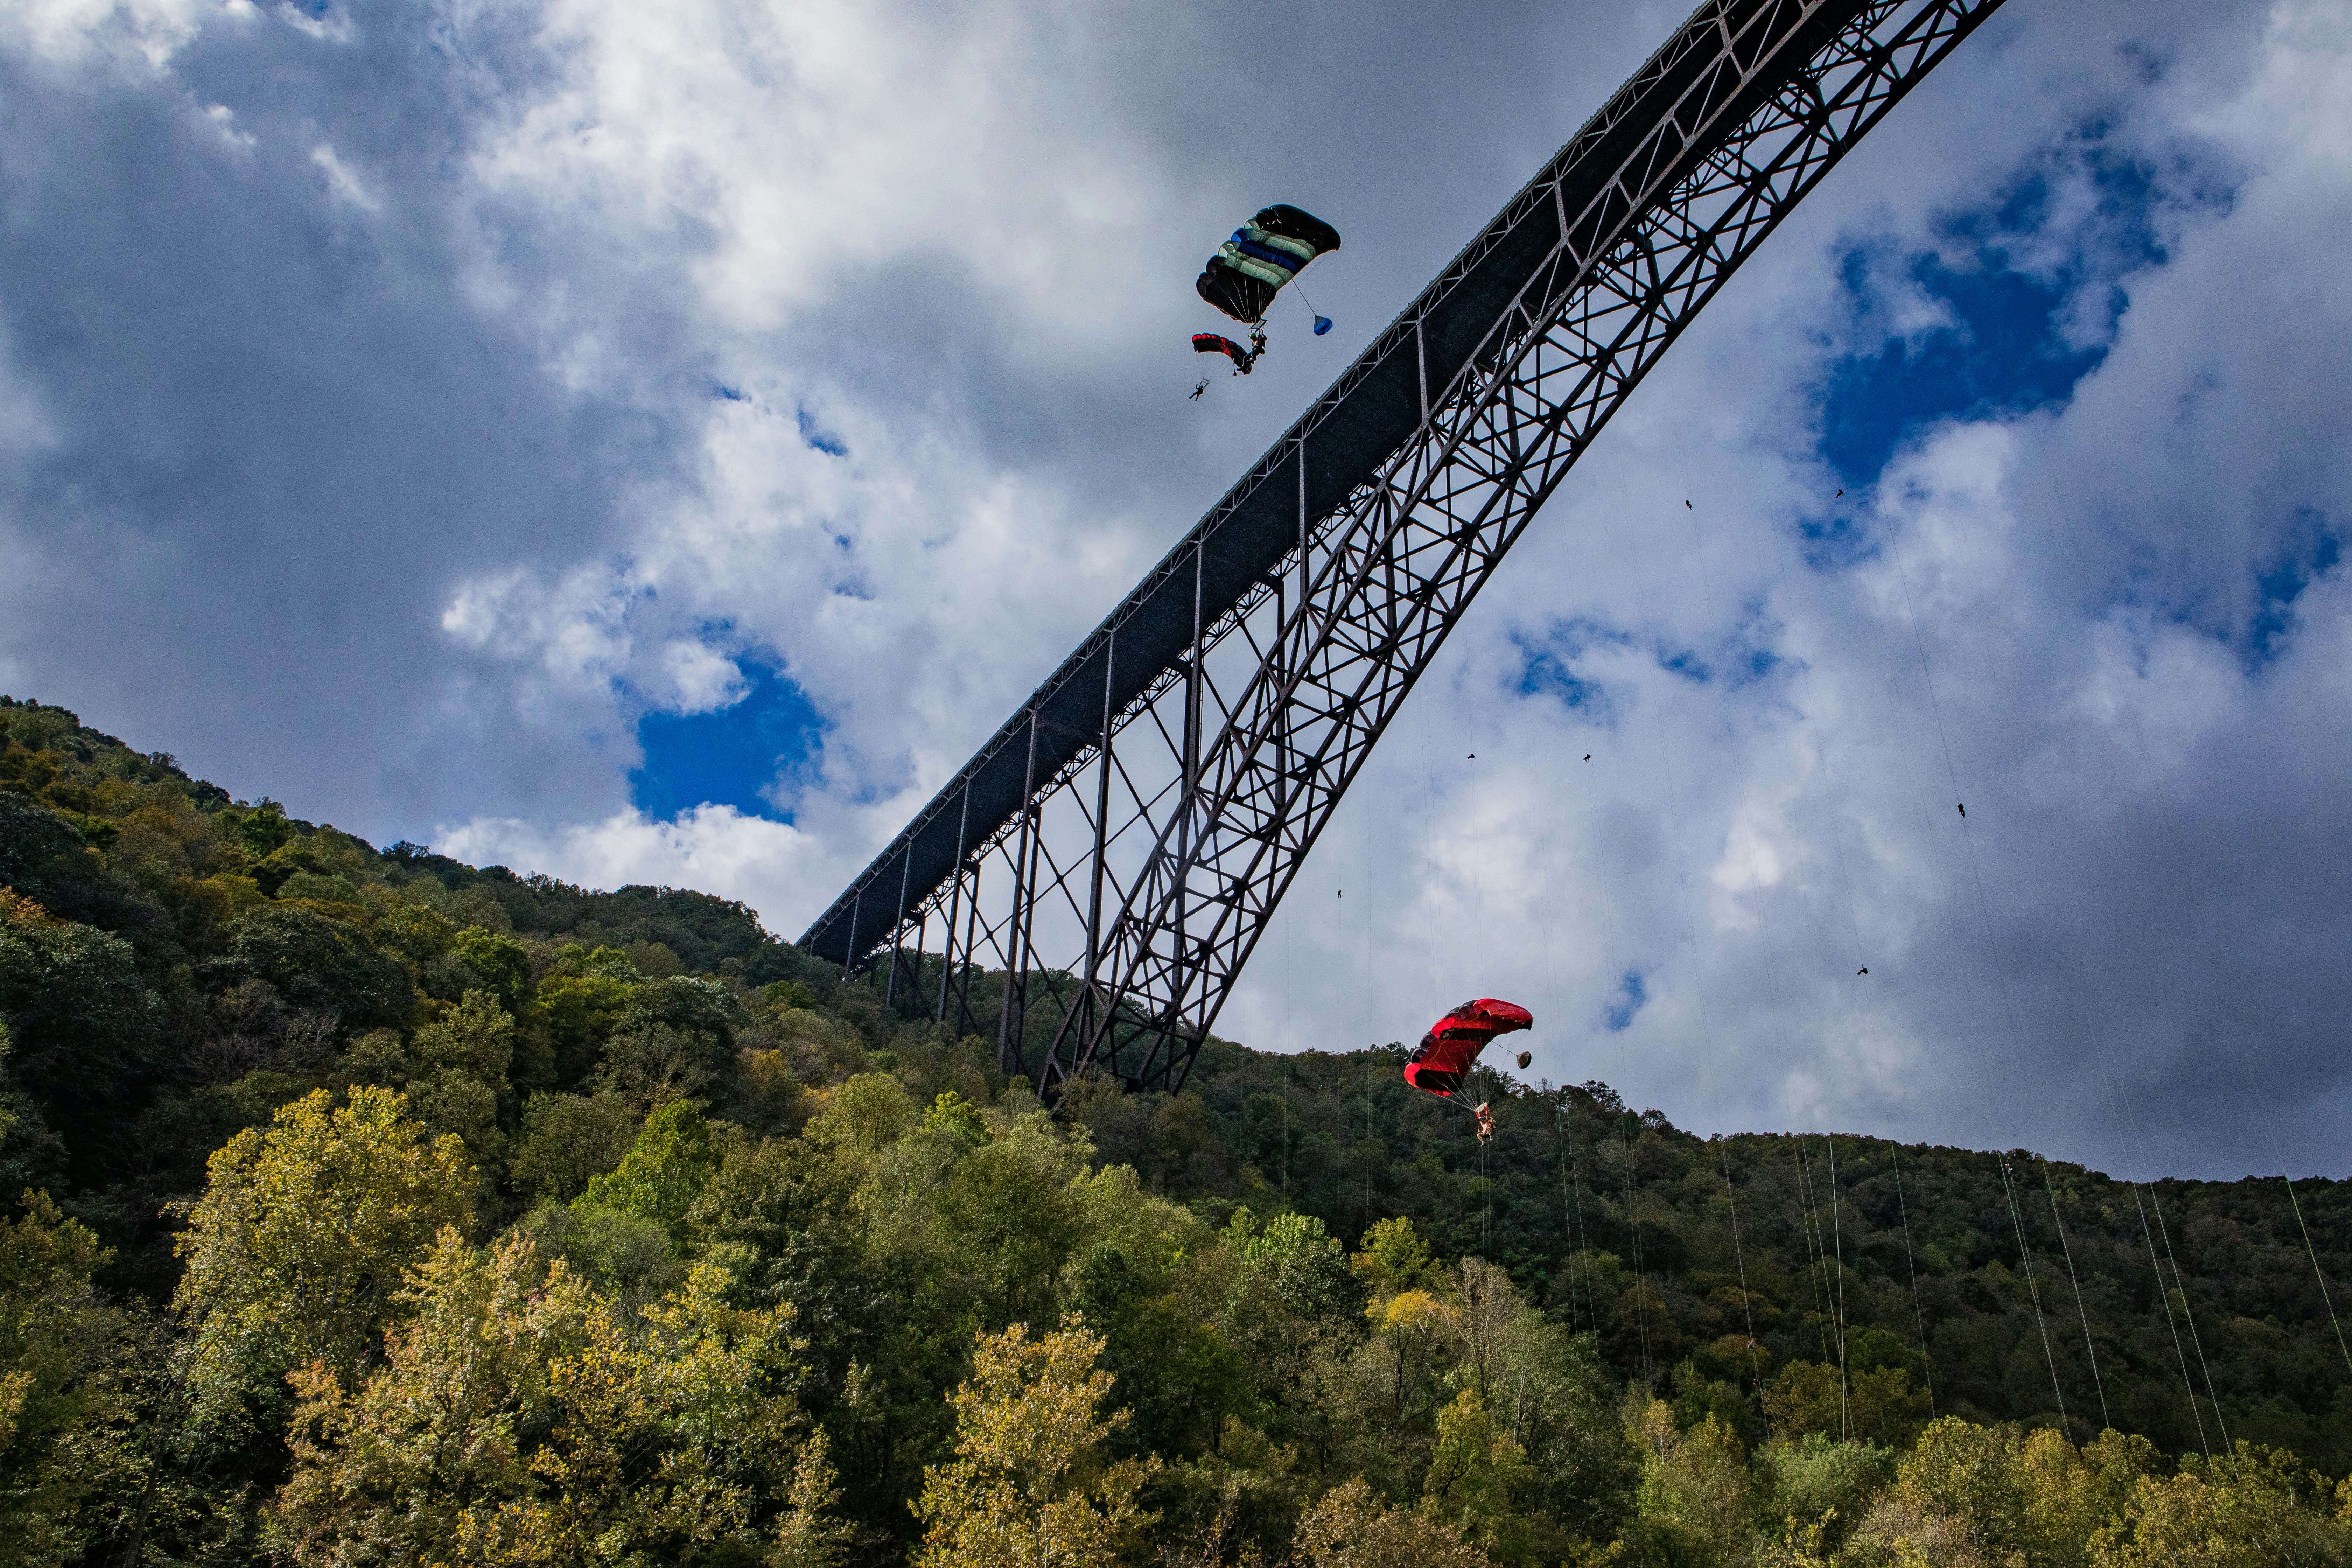 Two parachuters are descending down the side of New River Gorge Bridge. The camera is almost directly beneath them. A cloudy sky and woodland is visible.